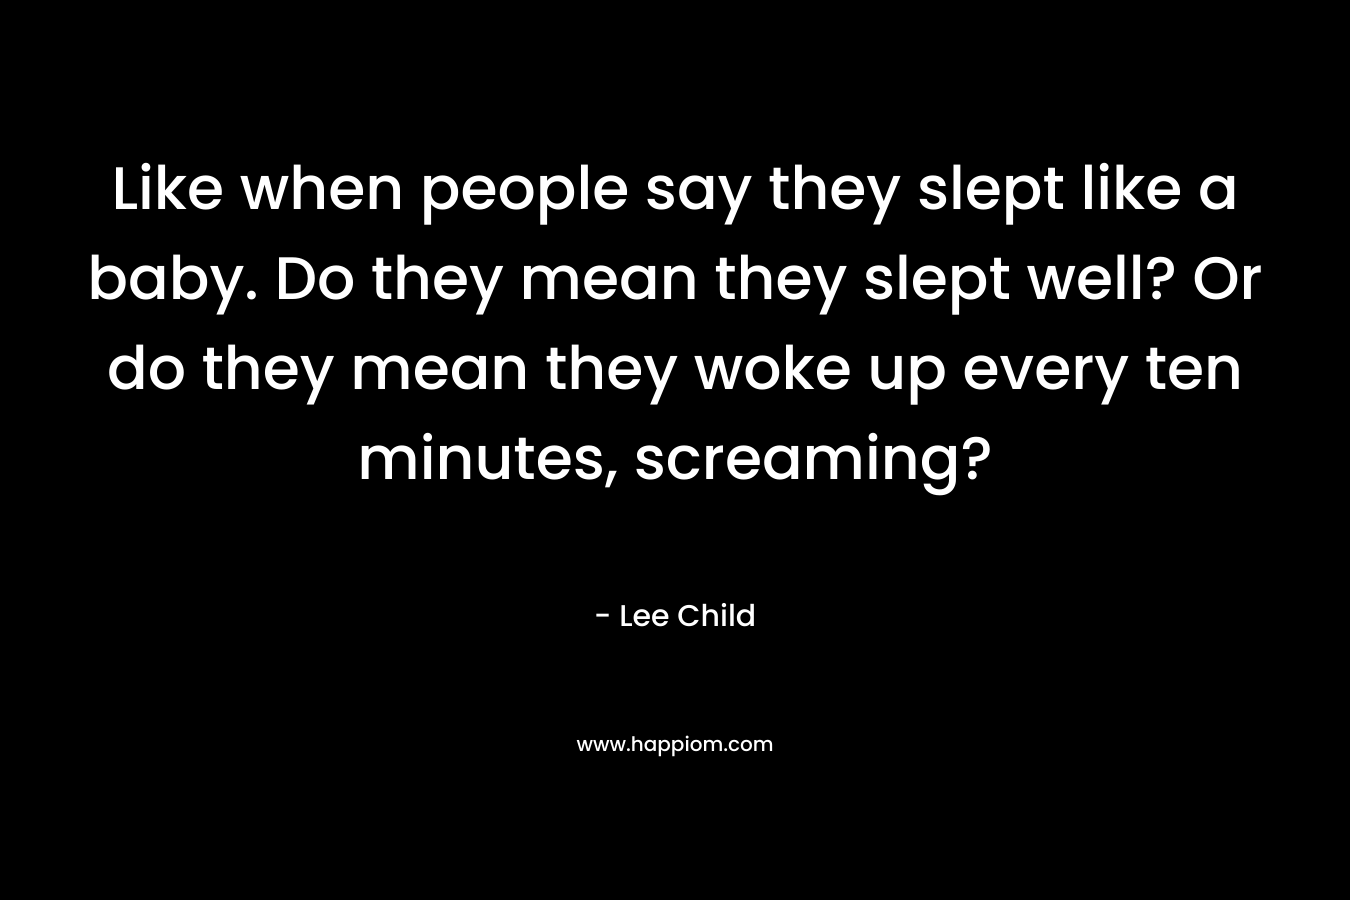 Like when people say they slept like a baby. Do they mean they slept well? Or do they mean they woke up every ten minutes, screaming? – Lee Child